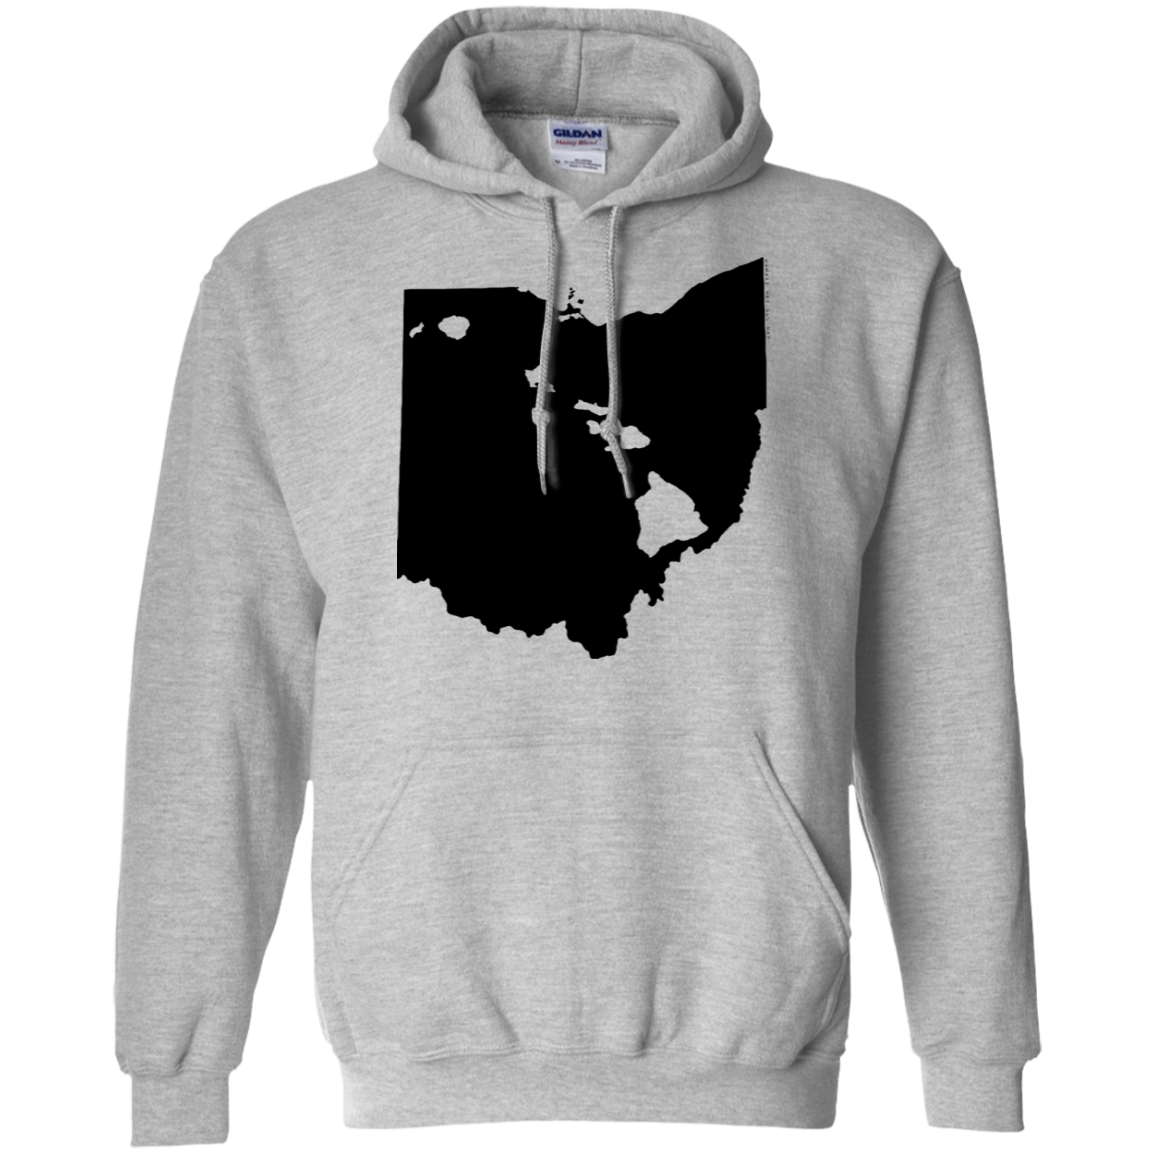 Living in Ohio with Hawaii Roots Pullover Hoodie 8 oz., Sweatshirts, Hawaii Nei All Day